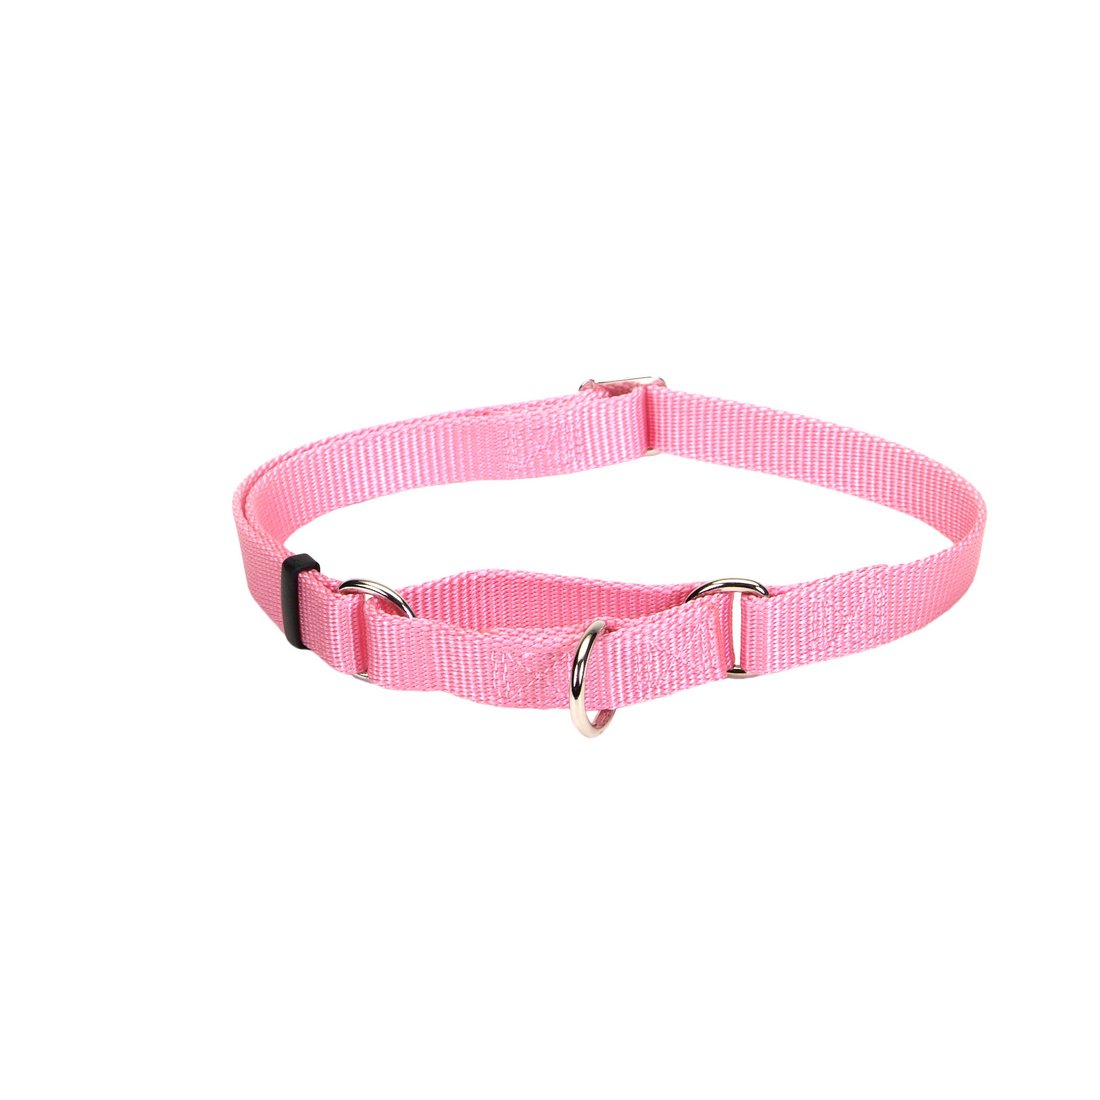 Hollywood Feed Ohio Made Combo Collar - Pink